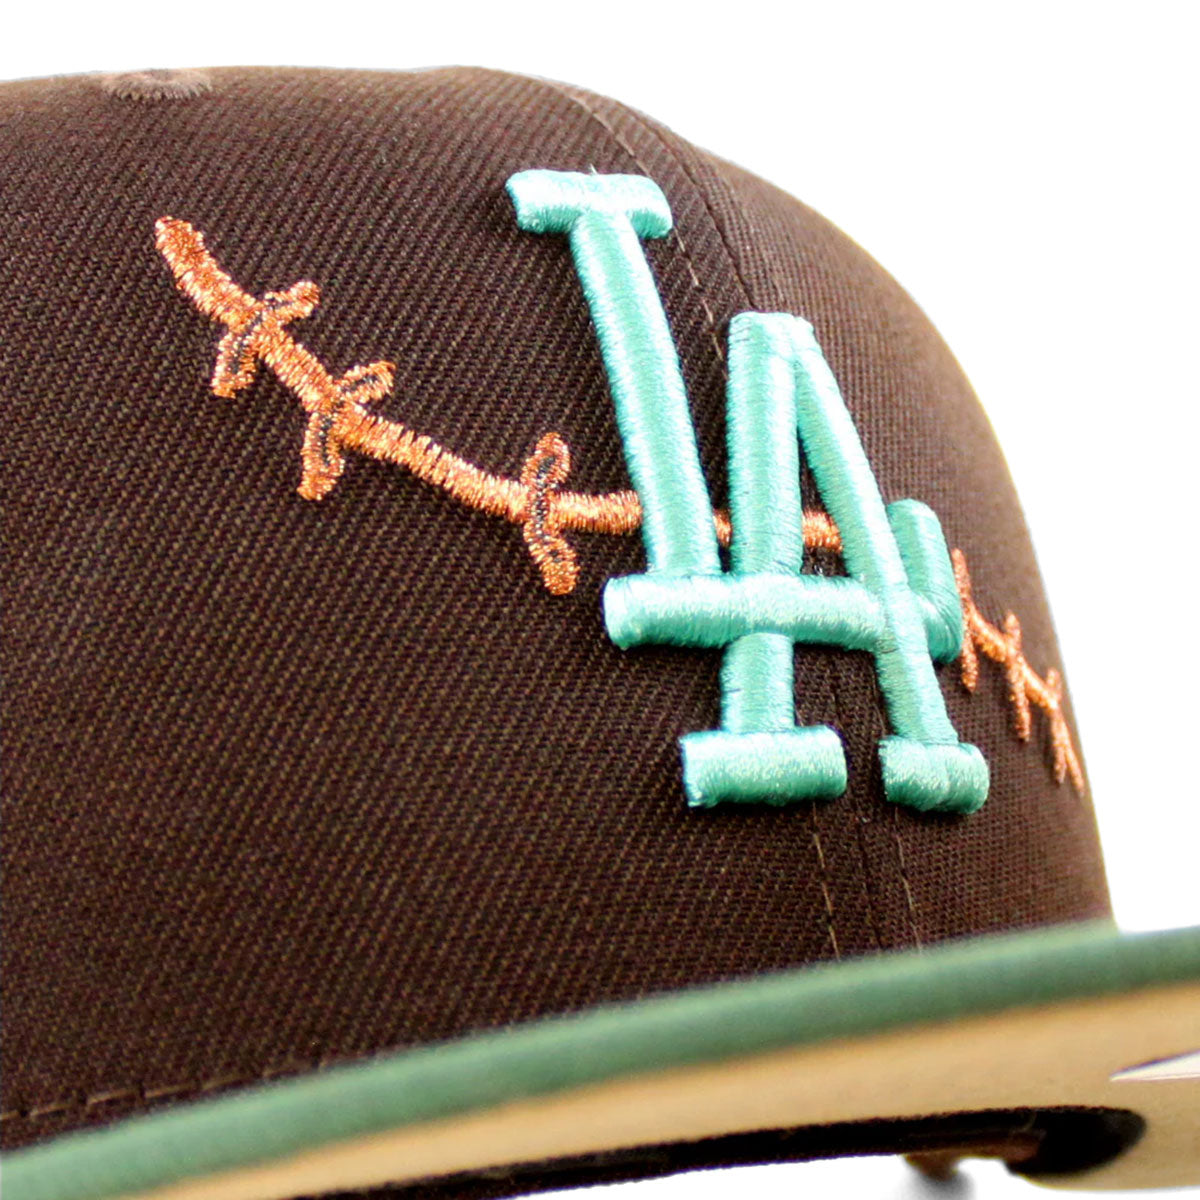 NEW ERA Los Angeles Dodgers - 59FIFTY 50TH ANV ZOMBIE PACK BURNT WOOD